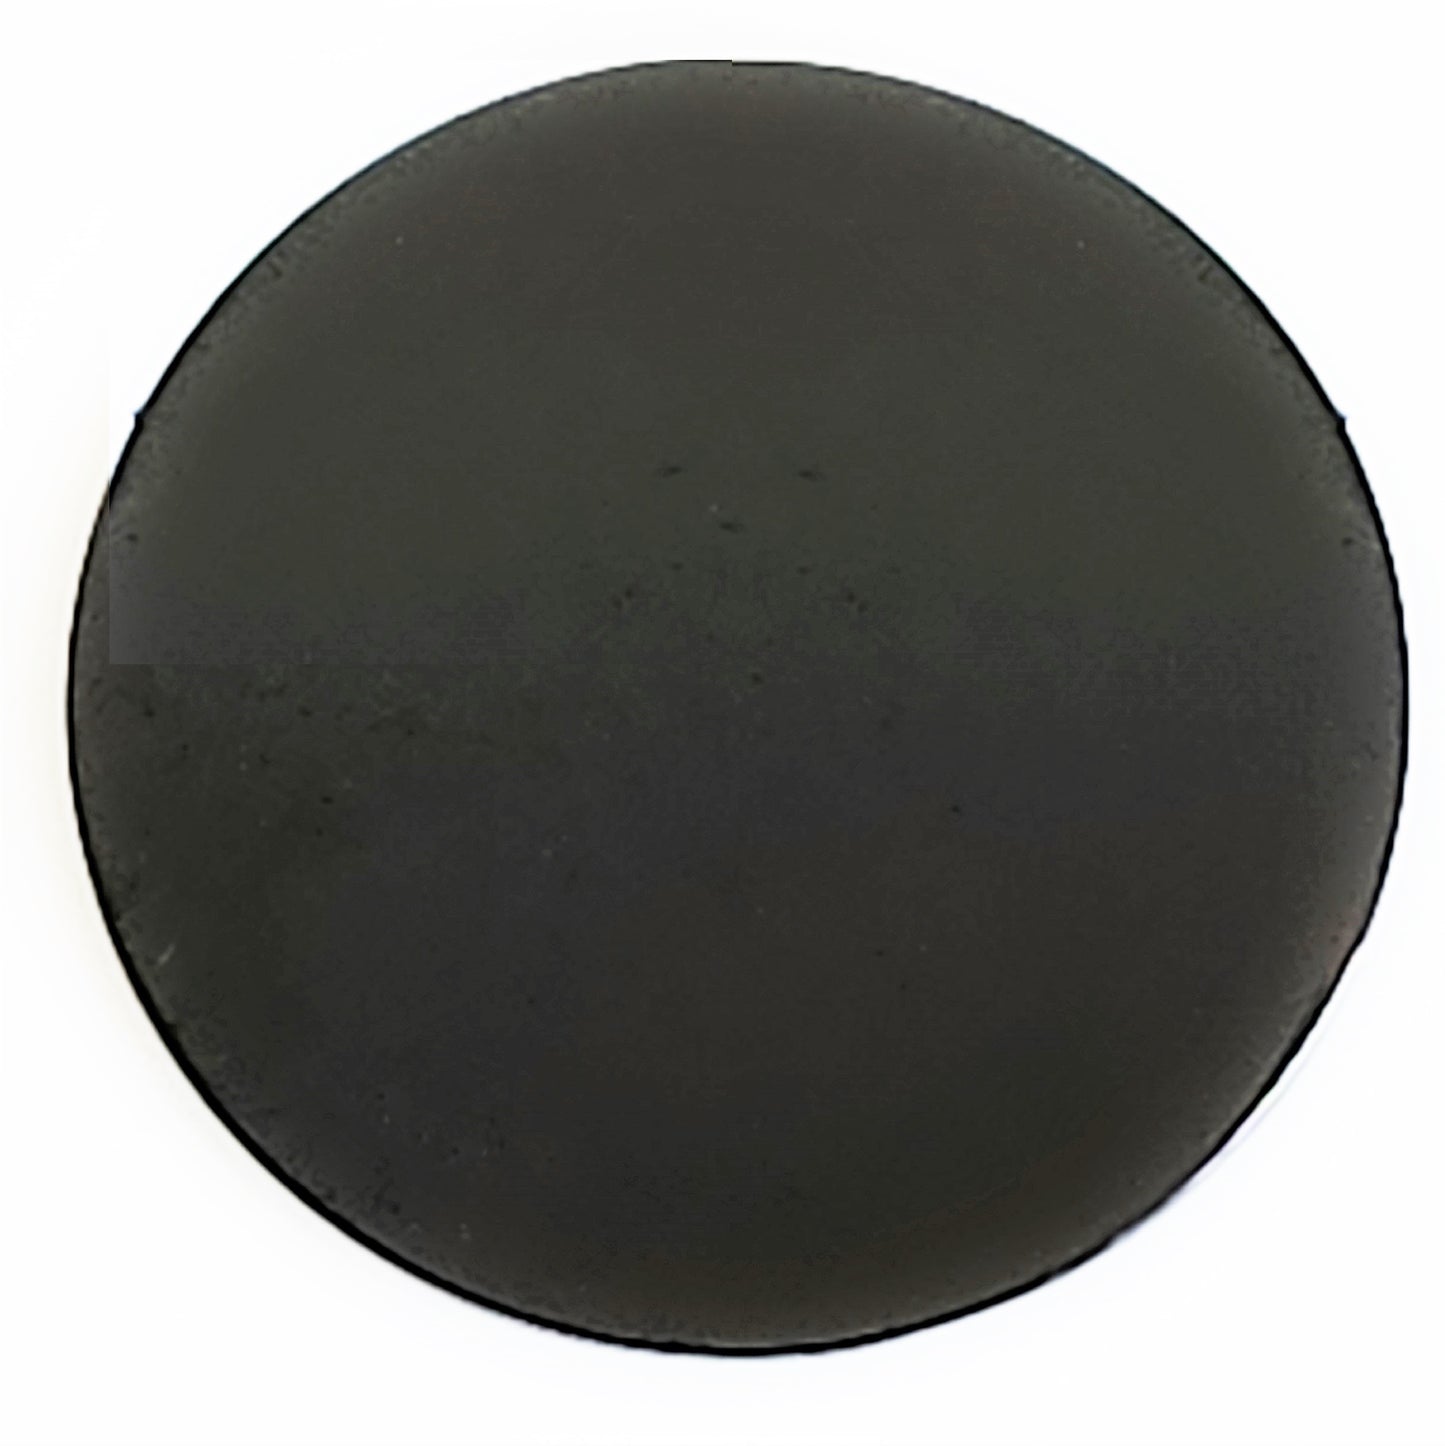 Black Plated Stainless Steel - 1 1/2" Circle (no hole)